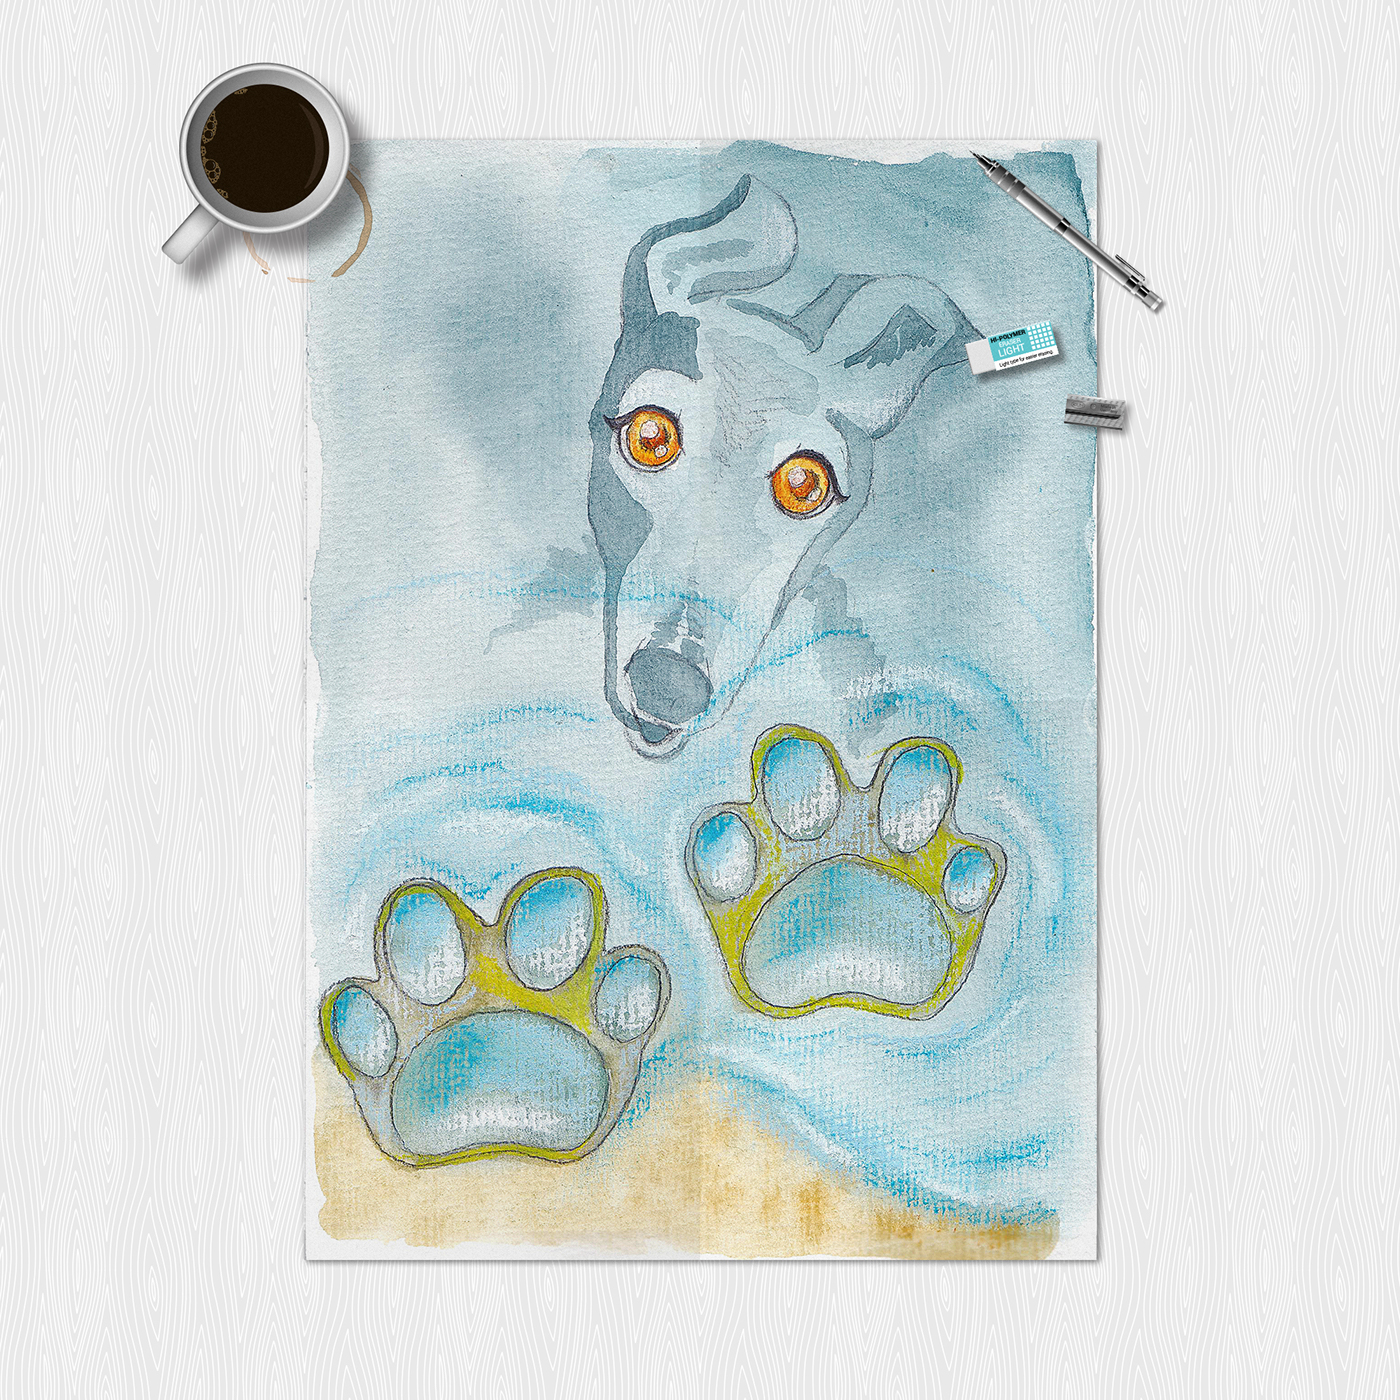 ancadesigns design sketch Cartoons characters animals doggy dog Cat watercolor blue imagination Order Project diverse